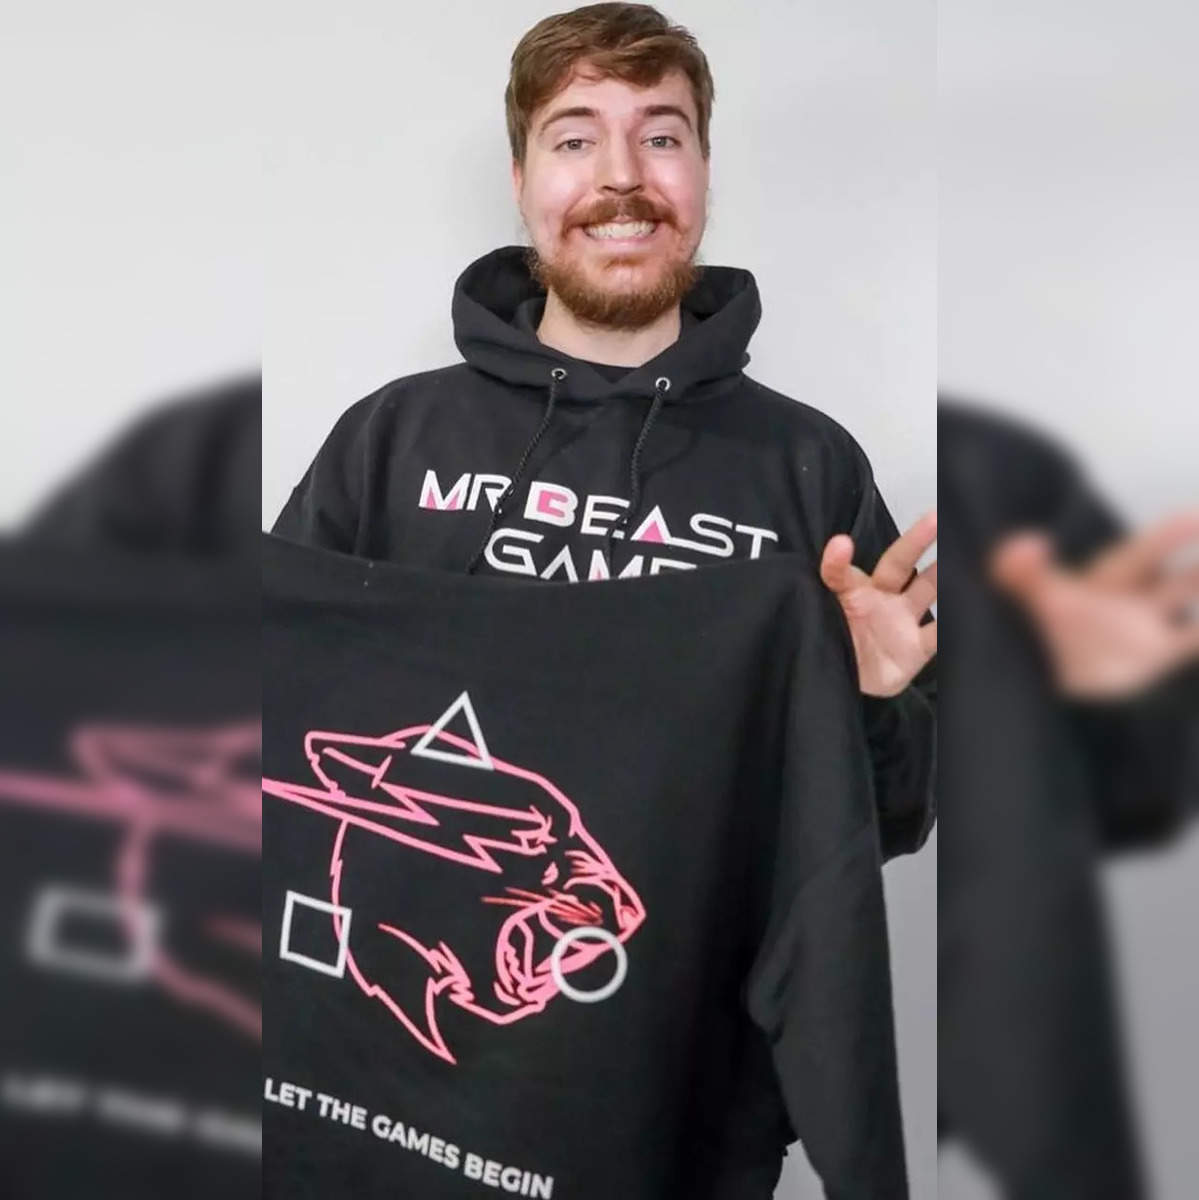 It's MrBeast's birthday! Here's 5 things you may not know about him